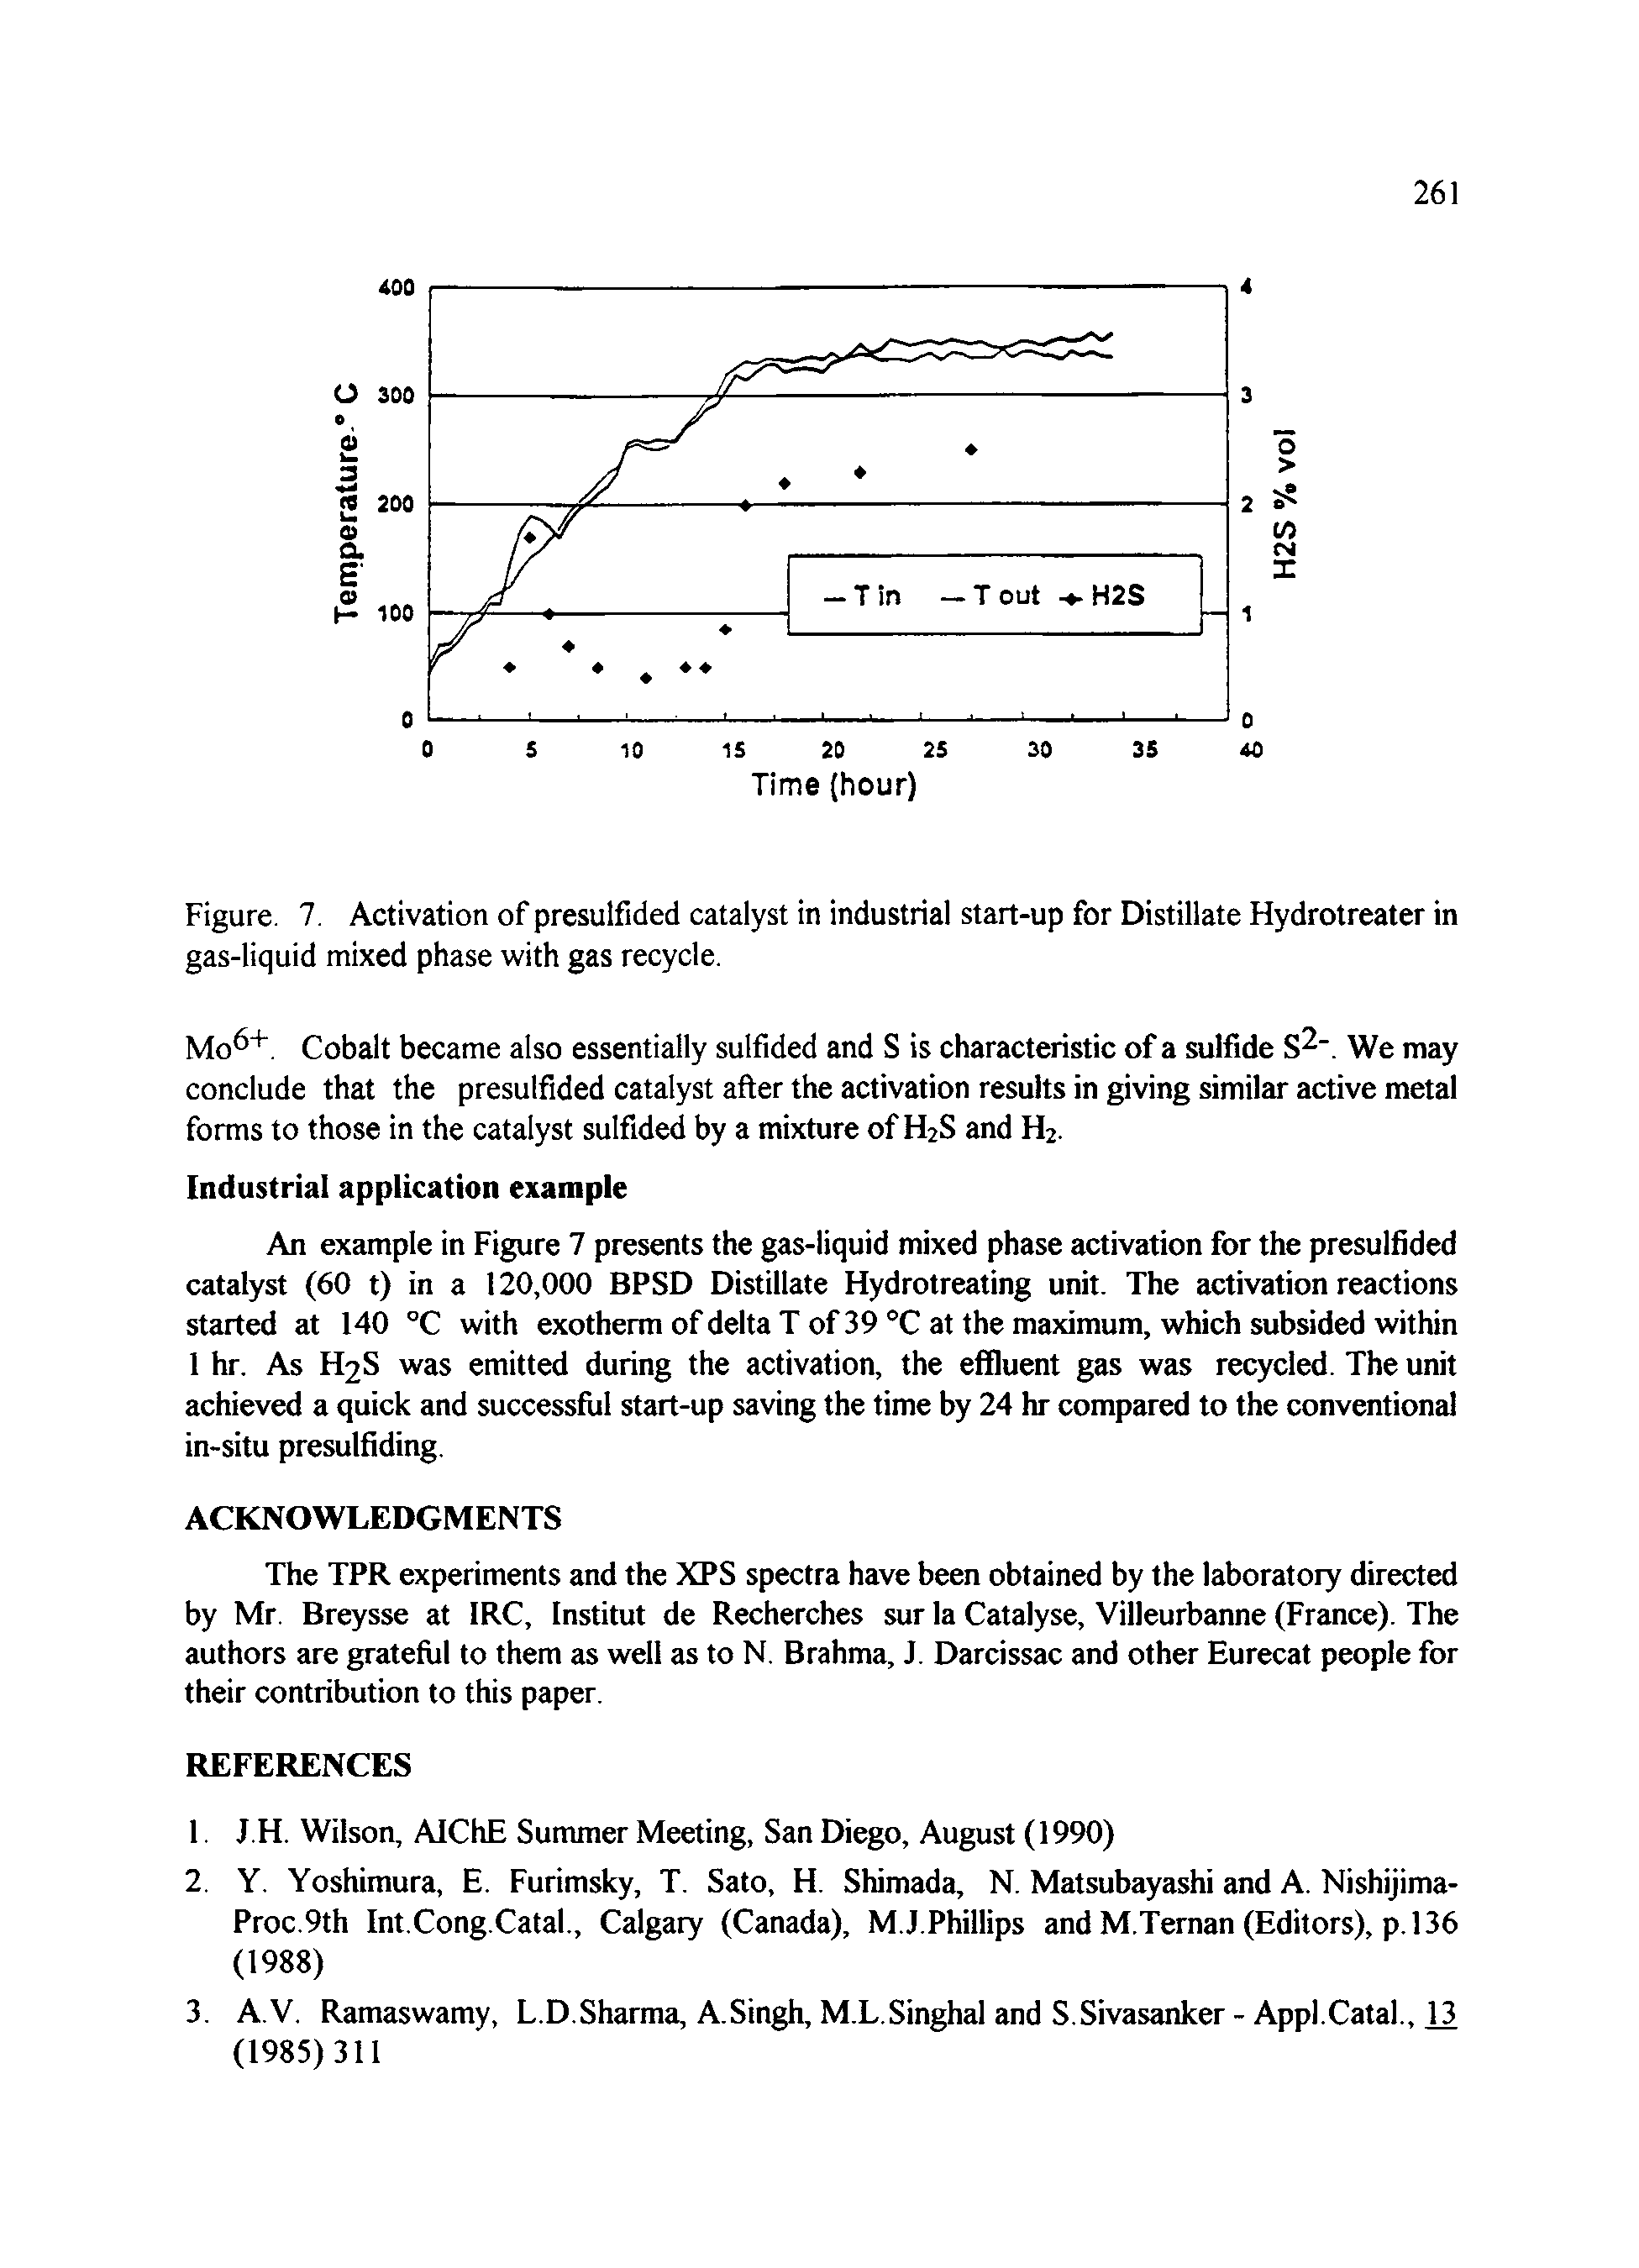 Figure. 7. Activation of presulfided catalyst in industrial start-up for Distillate Hydrotreater in gas-liquid mixed phase with gas recycle.